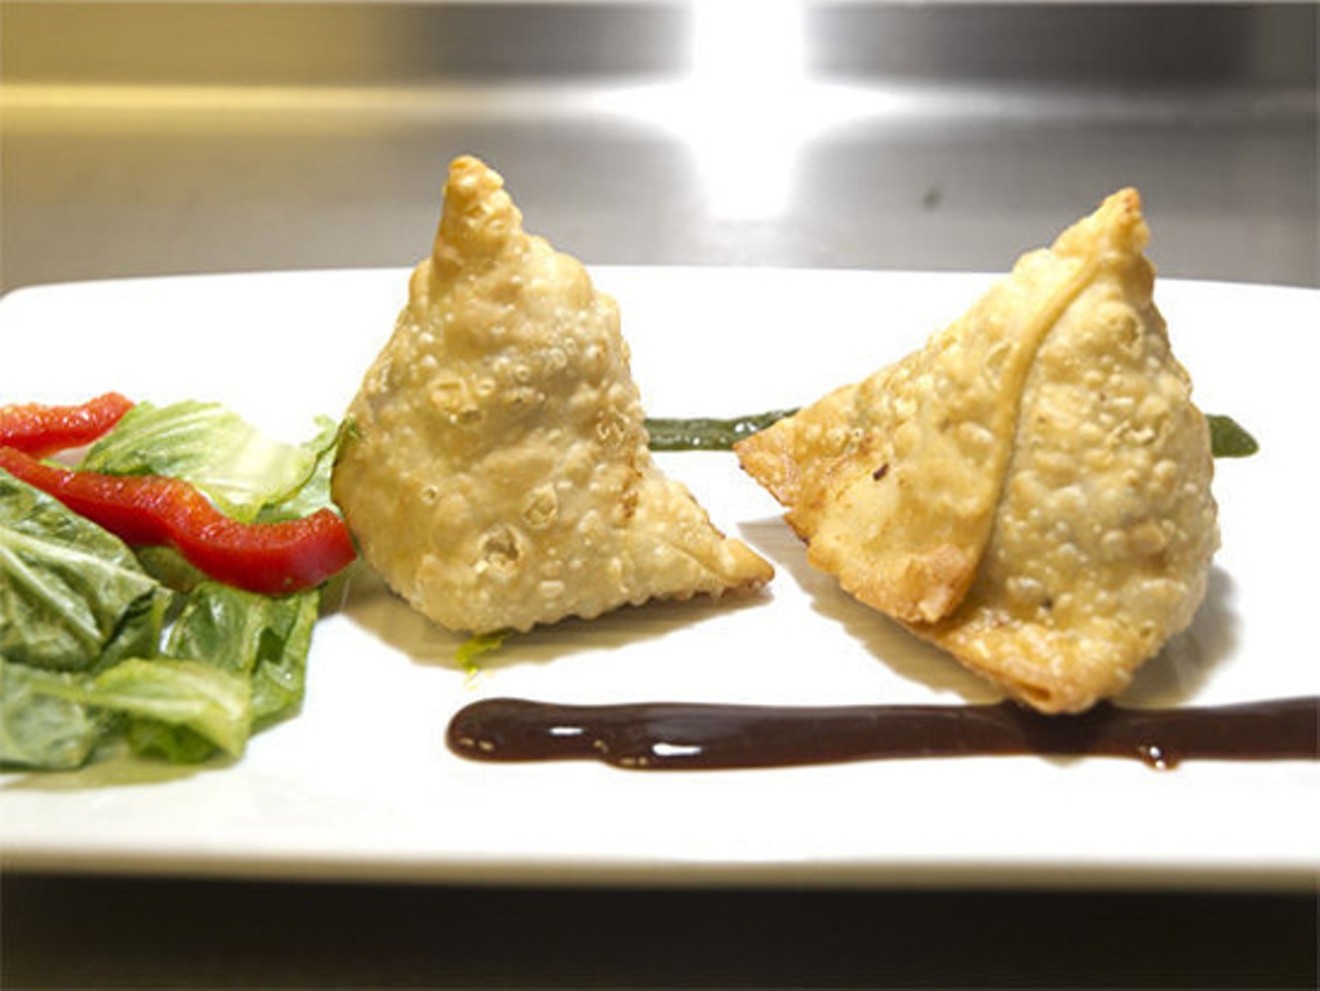 The vegan samosas are filled with mostly lentil and potato.